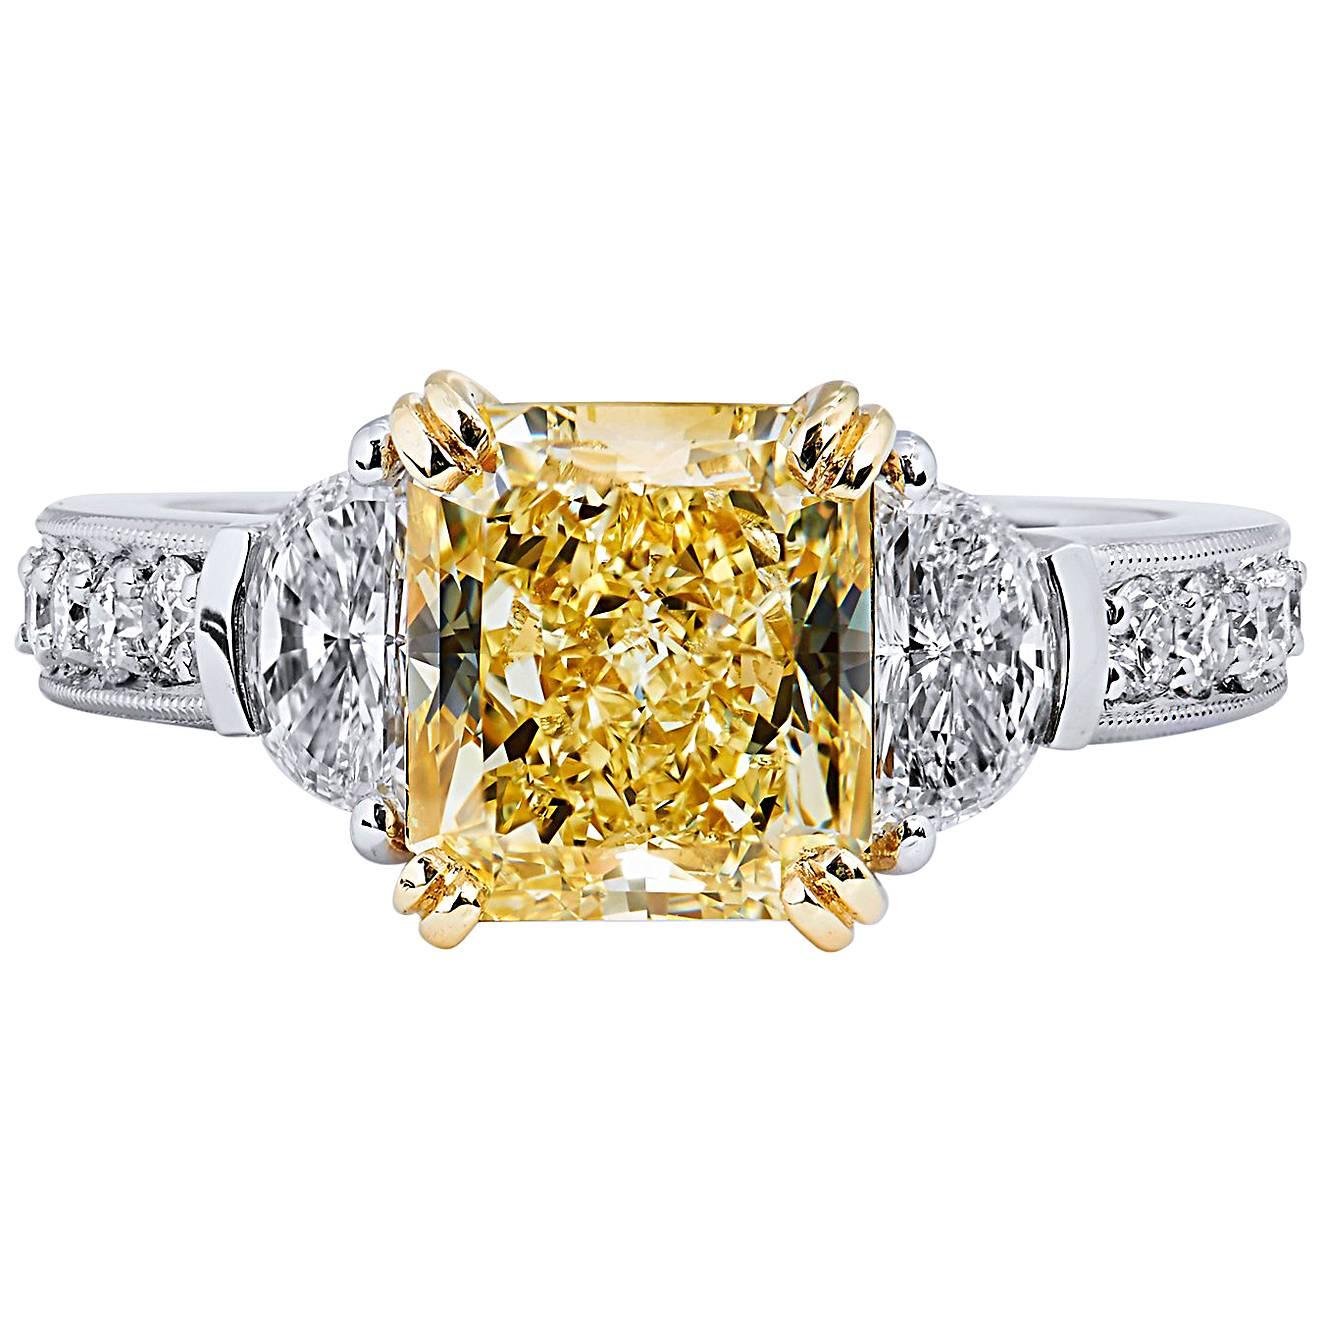 GIA Certified 3.17 Carat Fancy Yellow and Half Moon-Shaped Diamond Ring